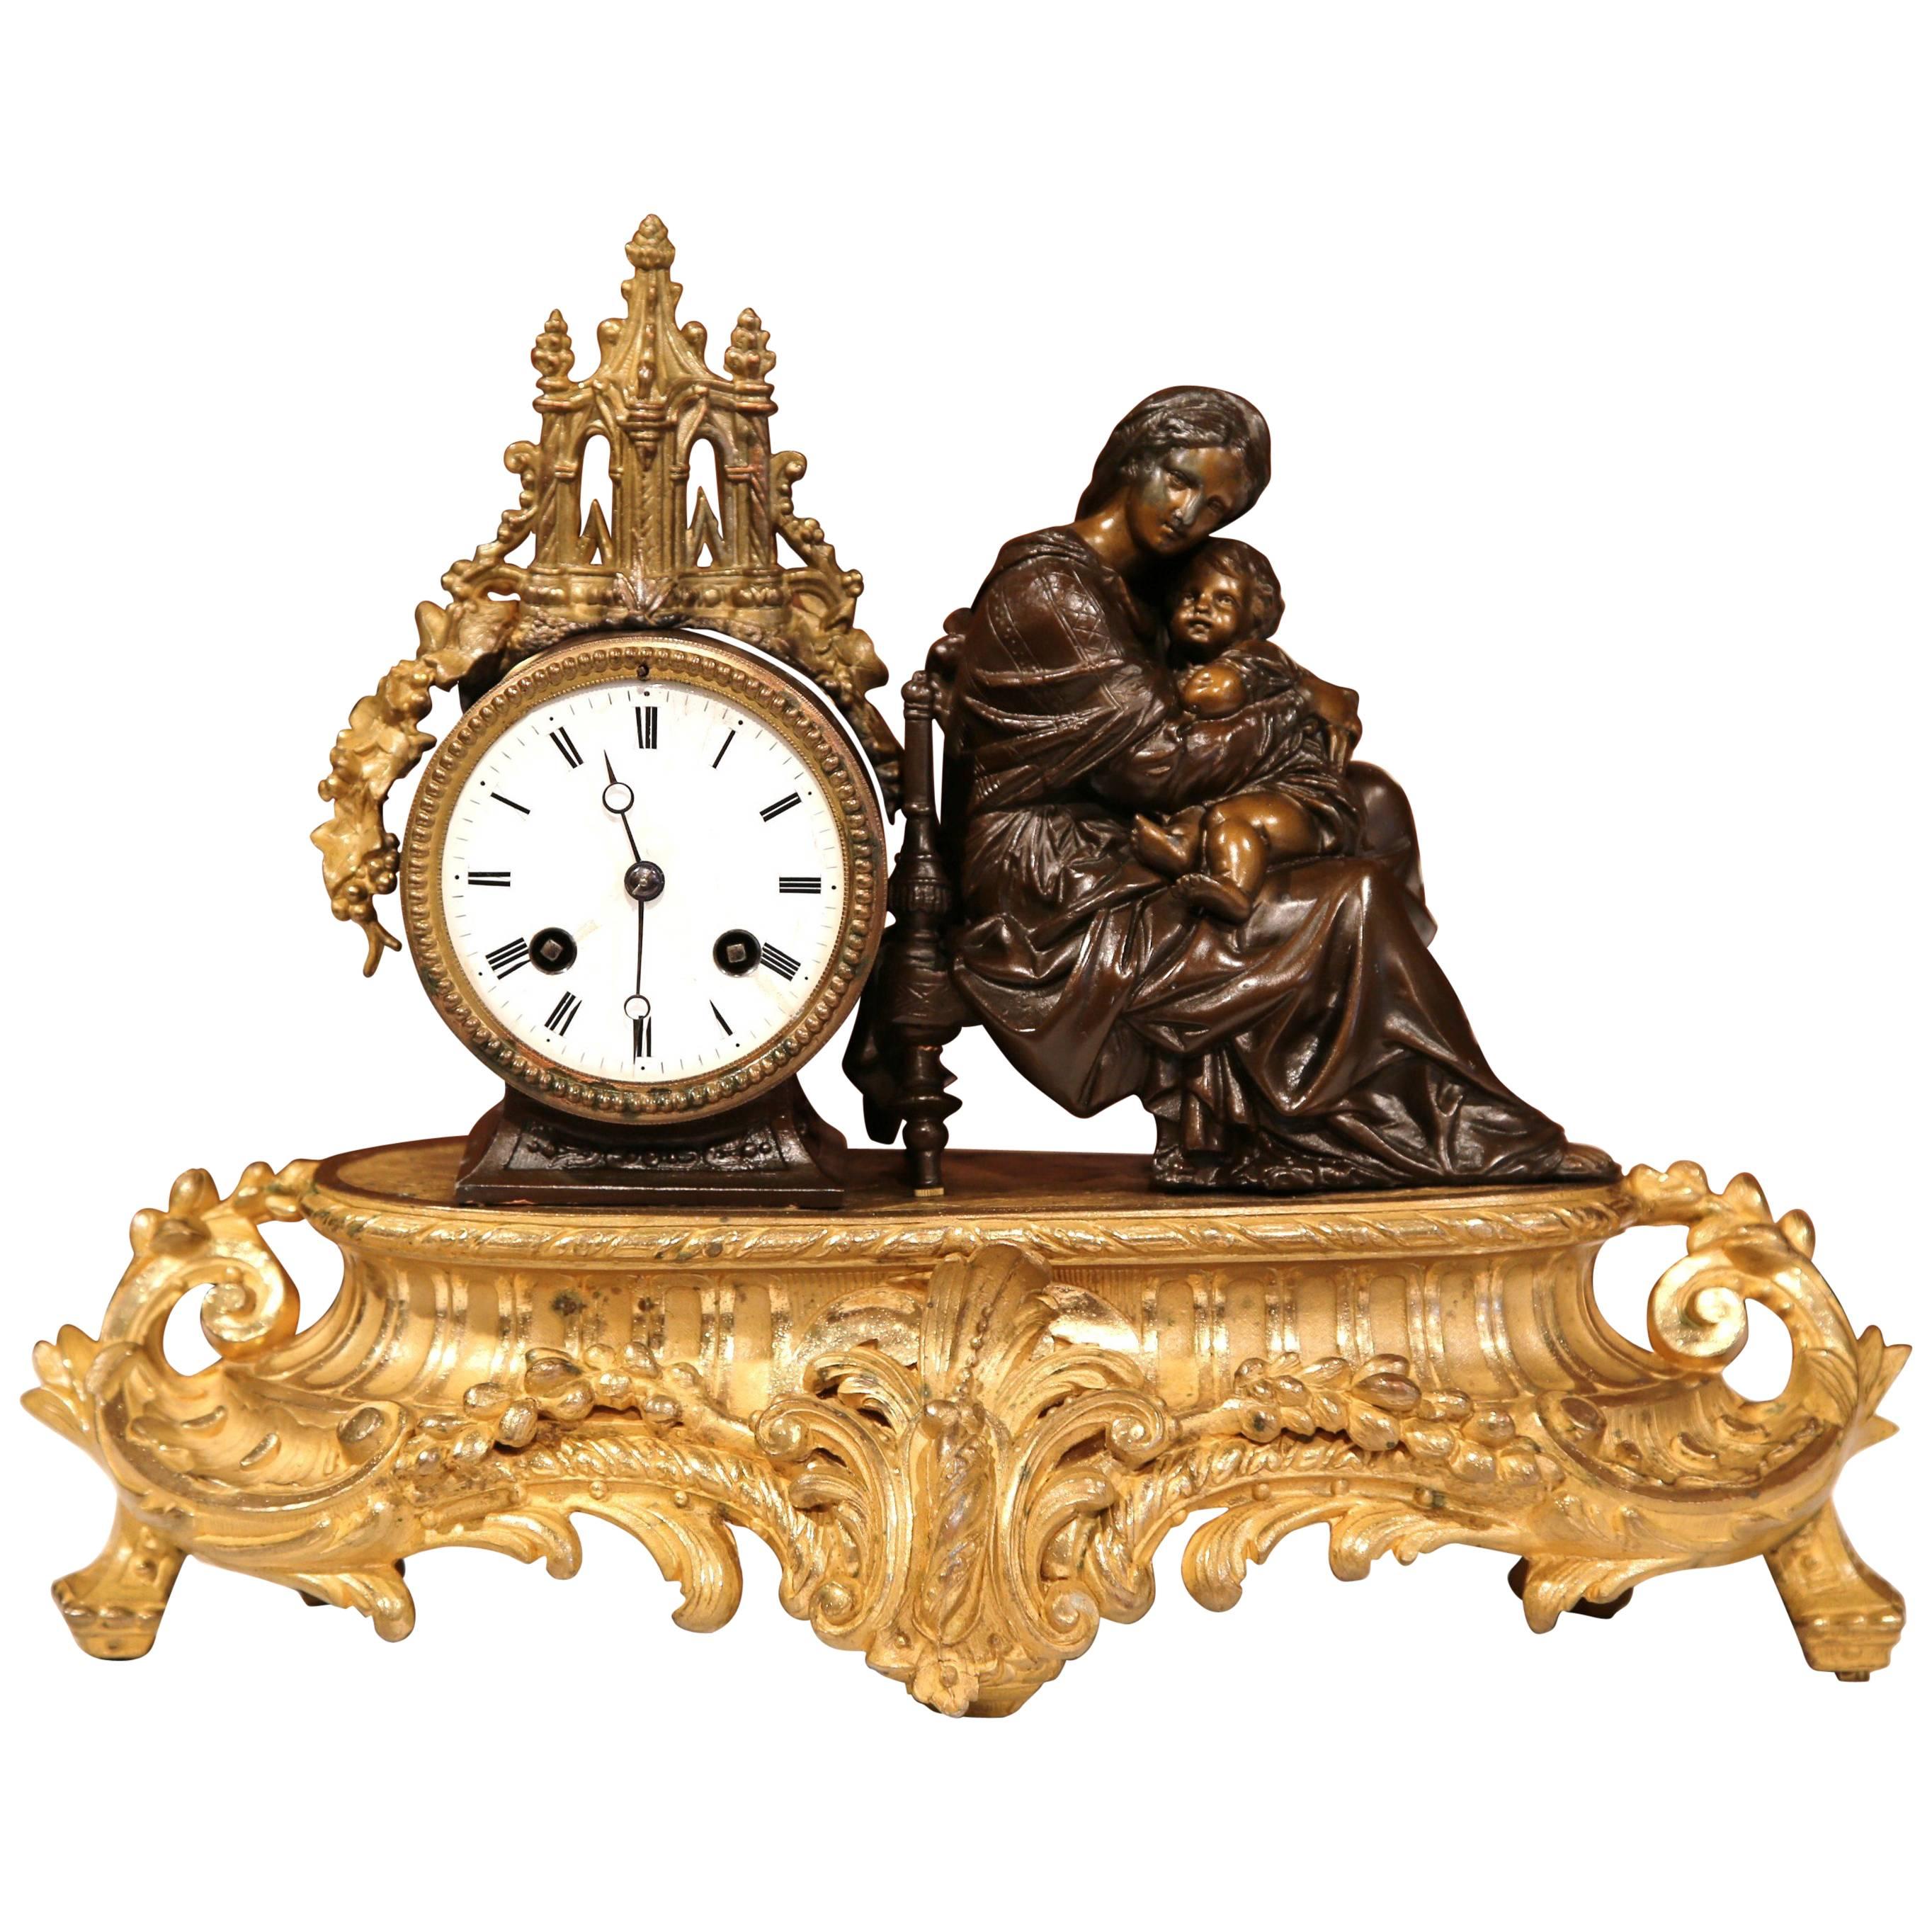 19th Century French Louis XV Bronze Mantel or Desk Clock with Mother and Child